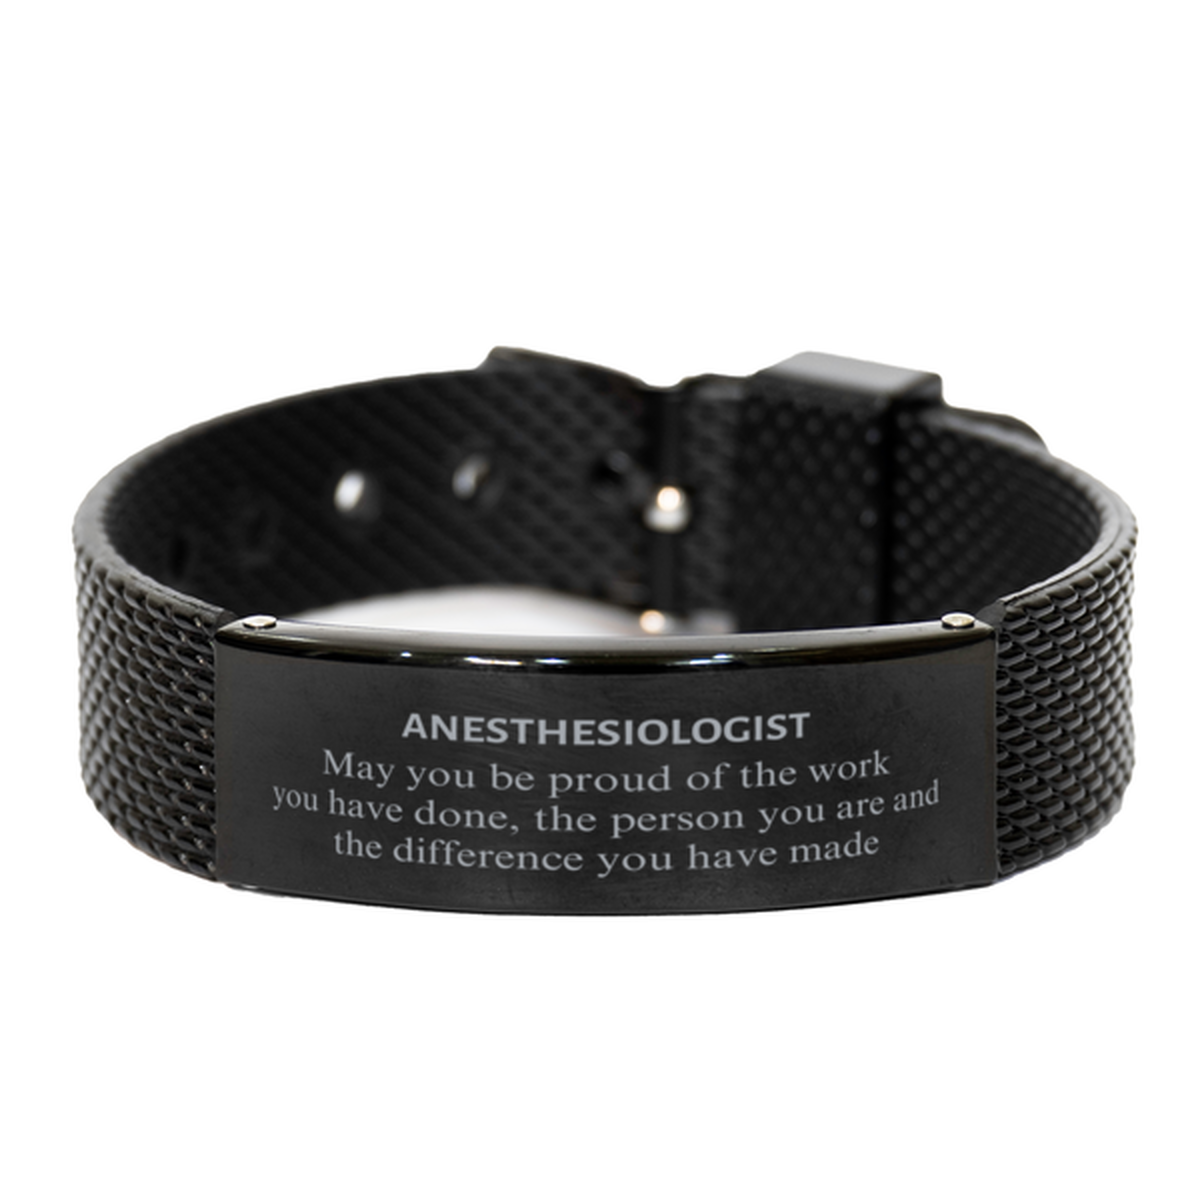 Anesthesiologist May you be proud of the work you have done, Retirement Anesthesiologist Black Shark Mesh Bracelet for Colleague Appreciation Gifts Amazing for Anesthesiologist